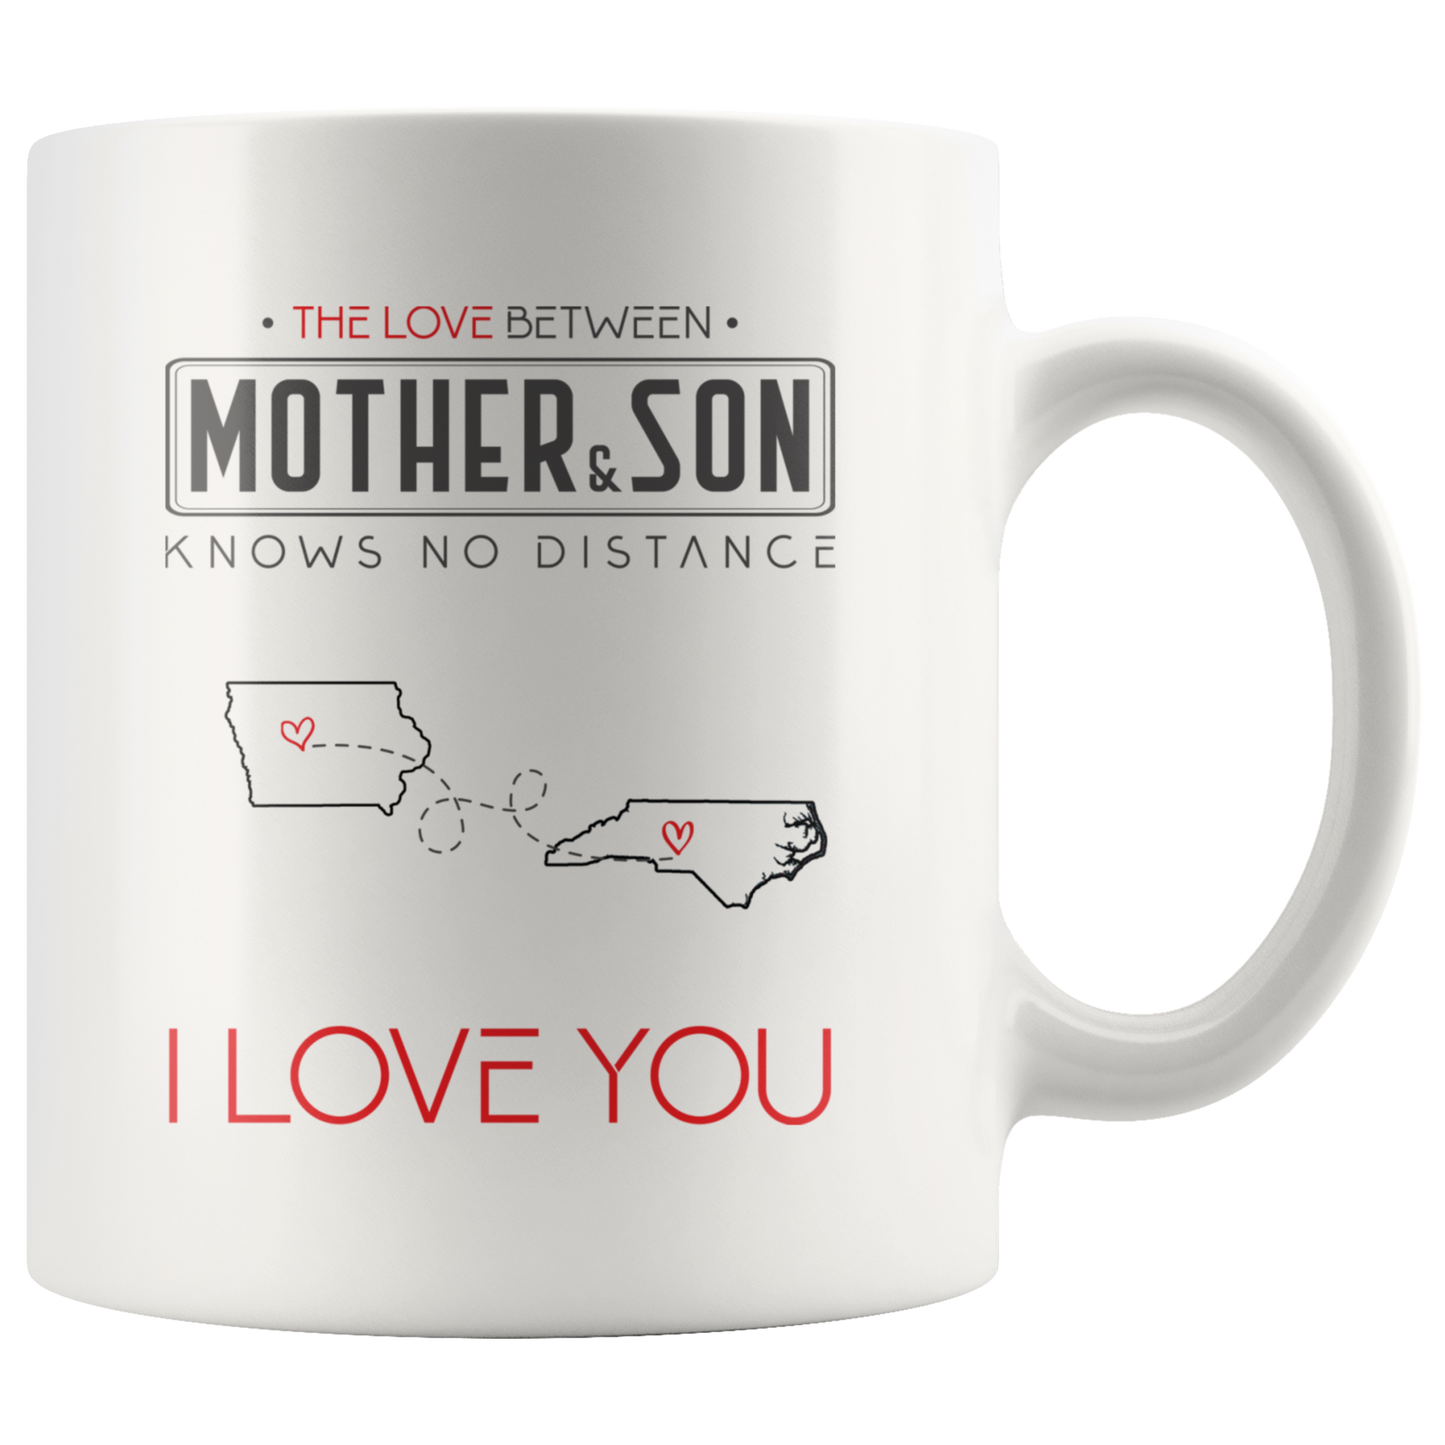 cust_80801_8229-sp-23468 - Mother And Son Mug 11 oz - The Love Between Mother And Son K